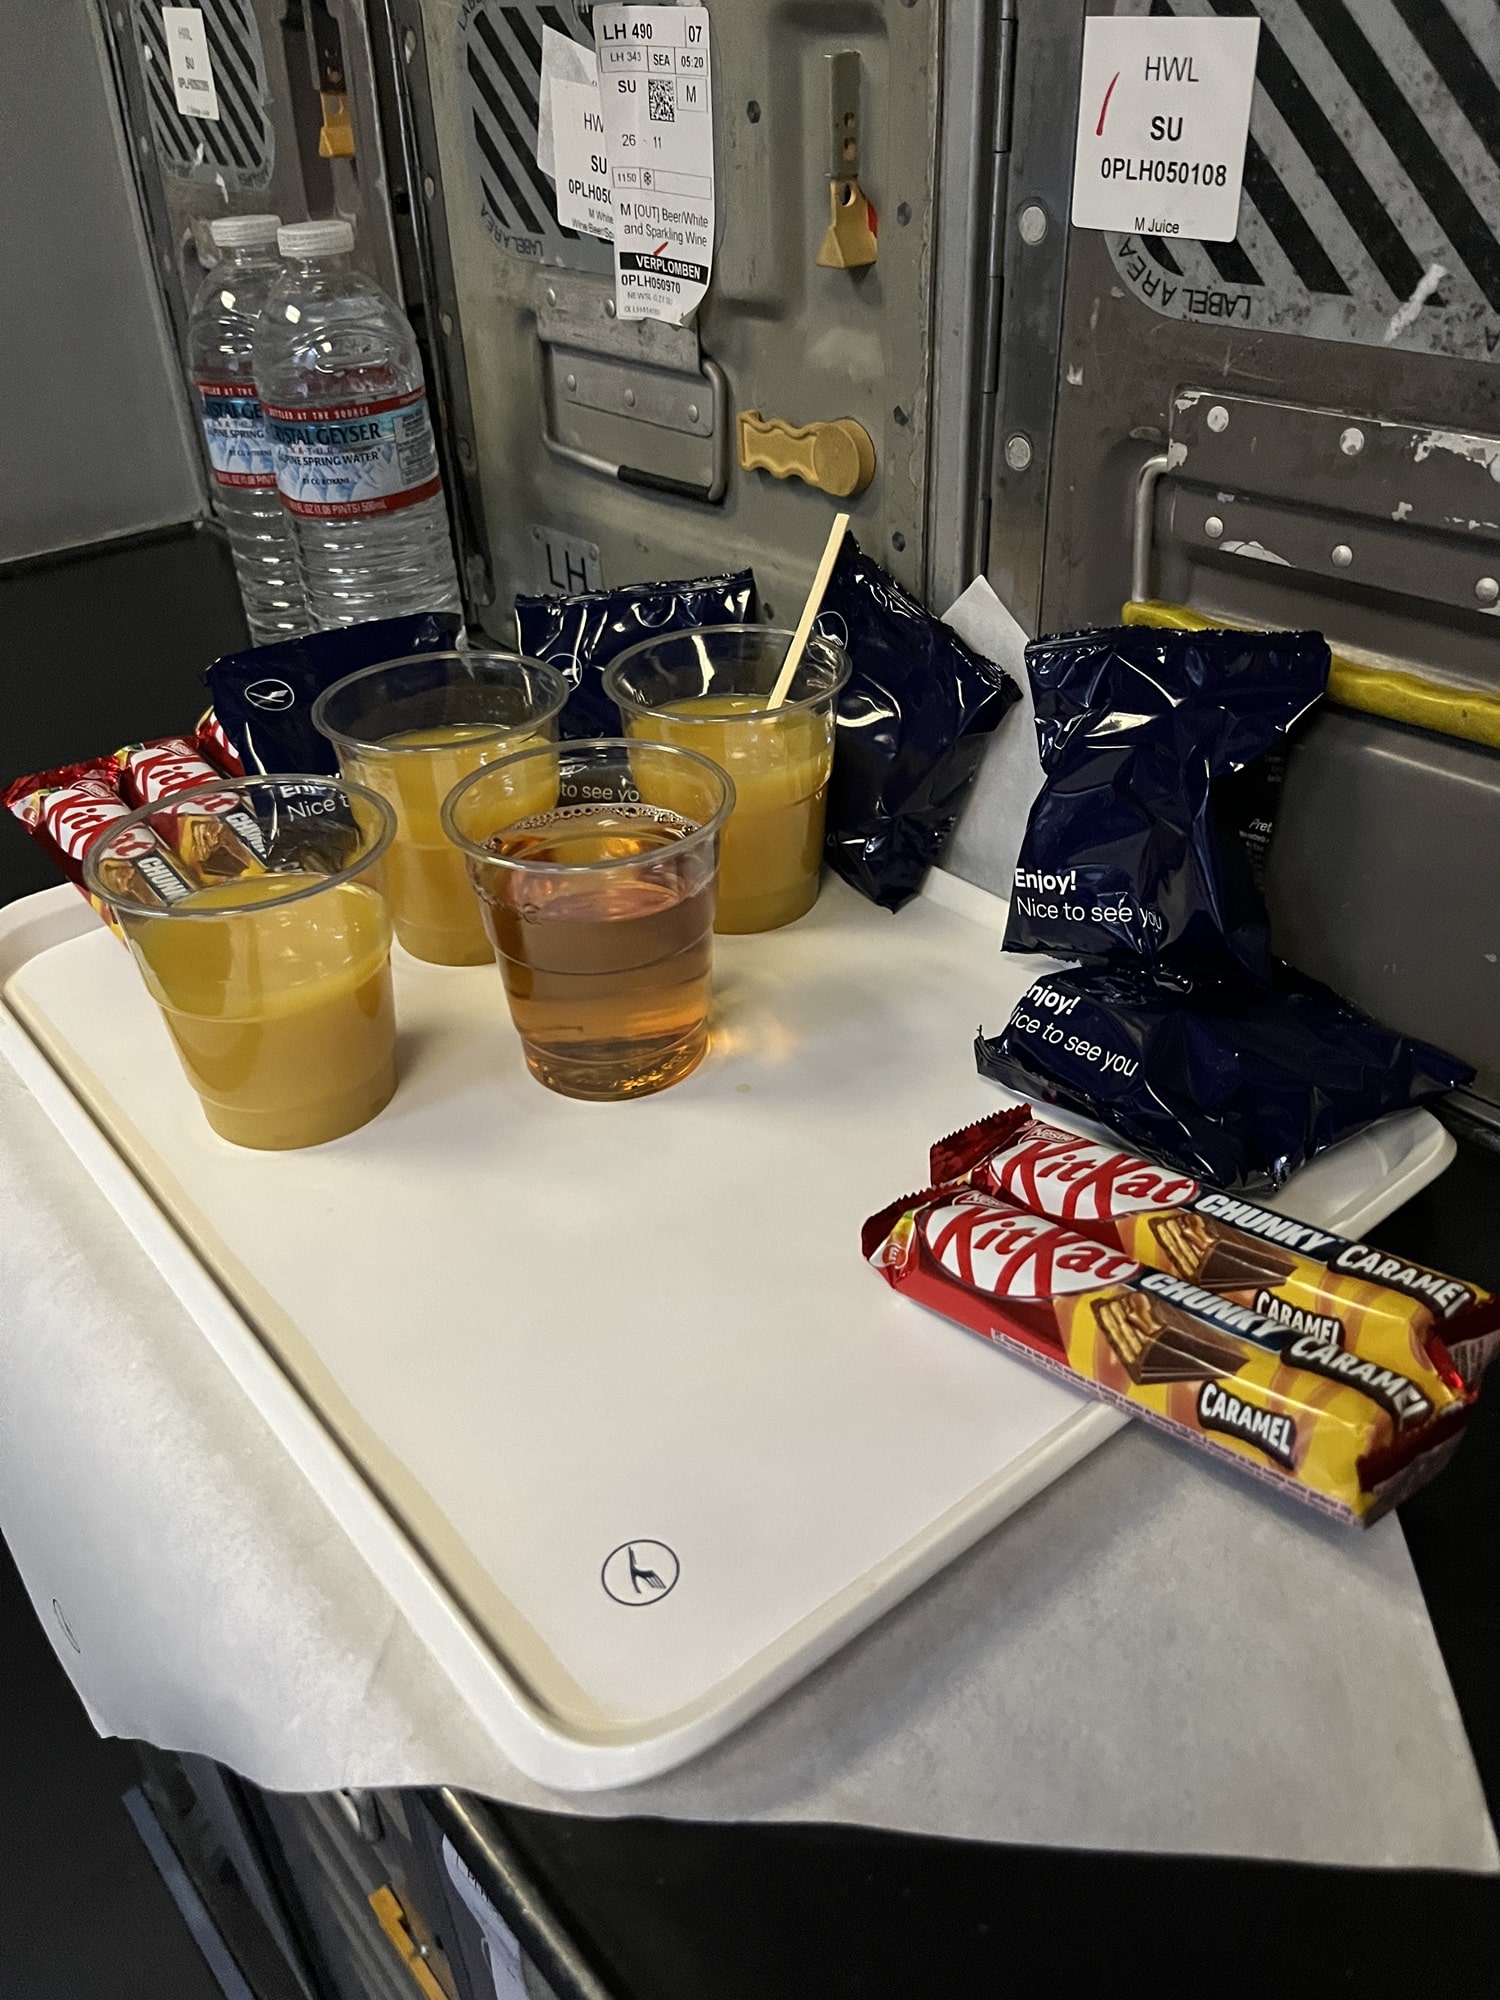 lufthansa business class a340 snacks in galley